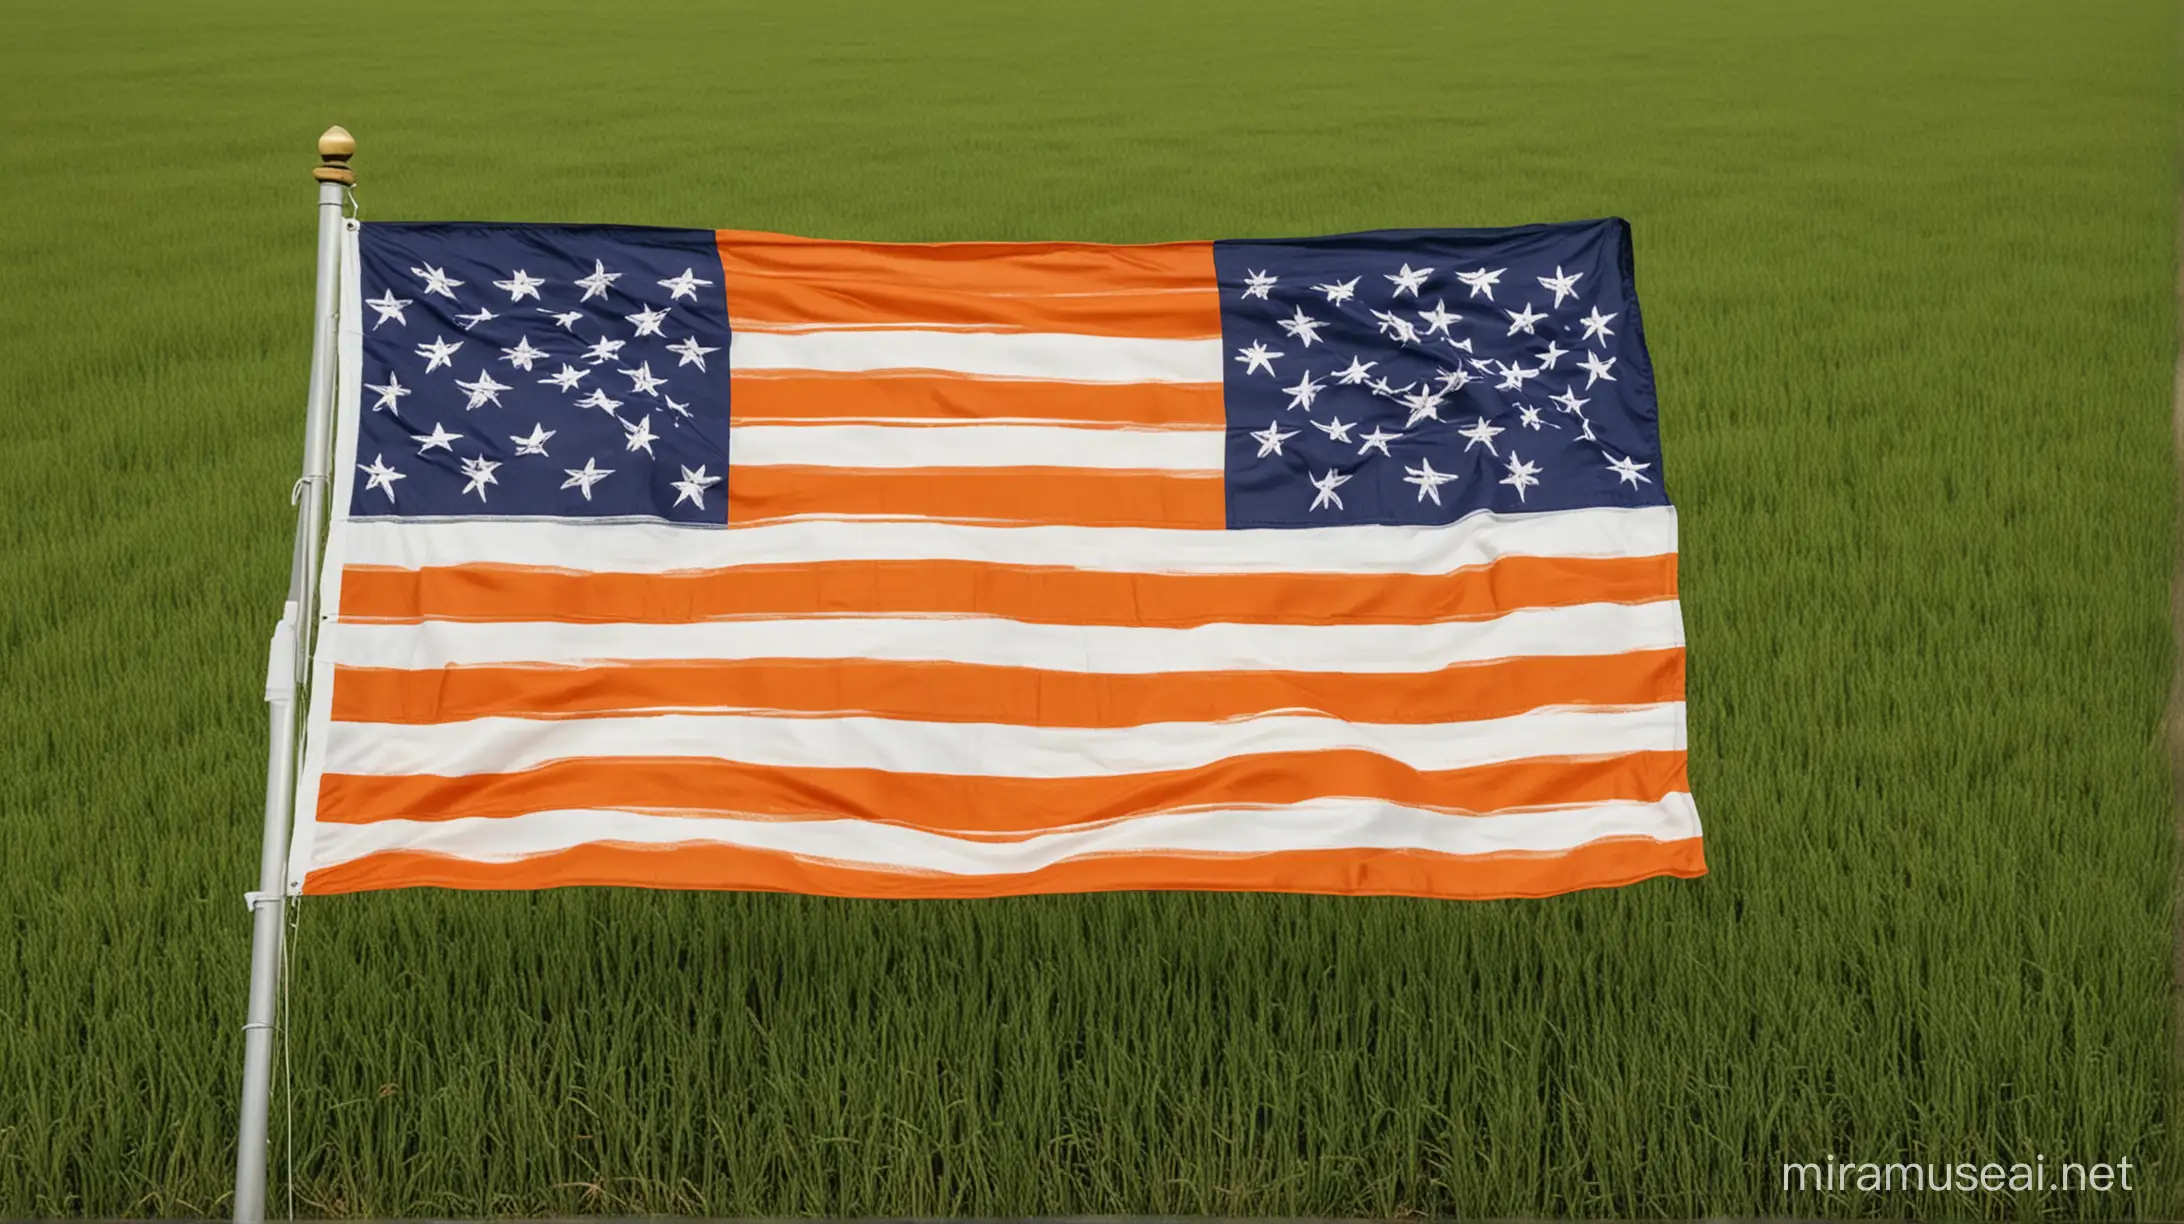 Patriotic American Flag with Orange and White Stripes and White Stars on Green Field